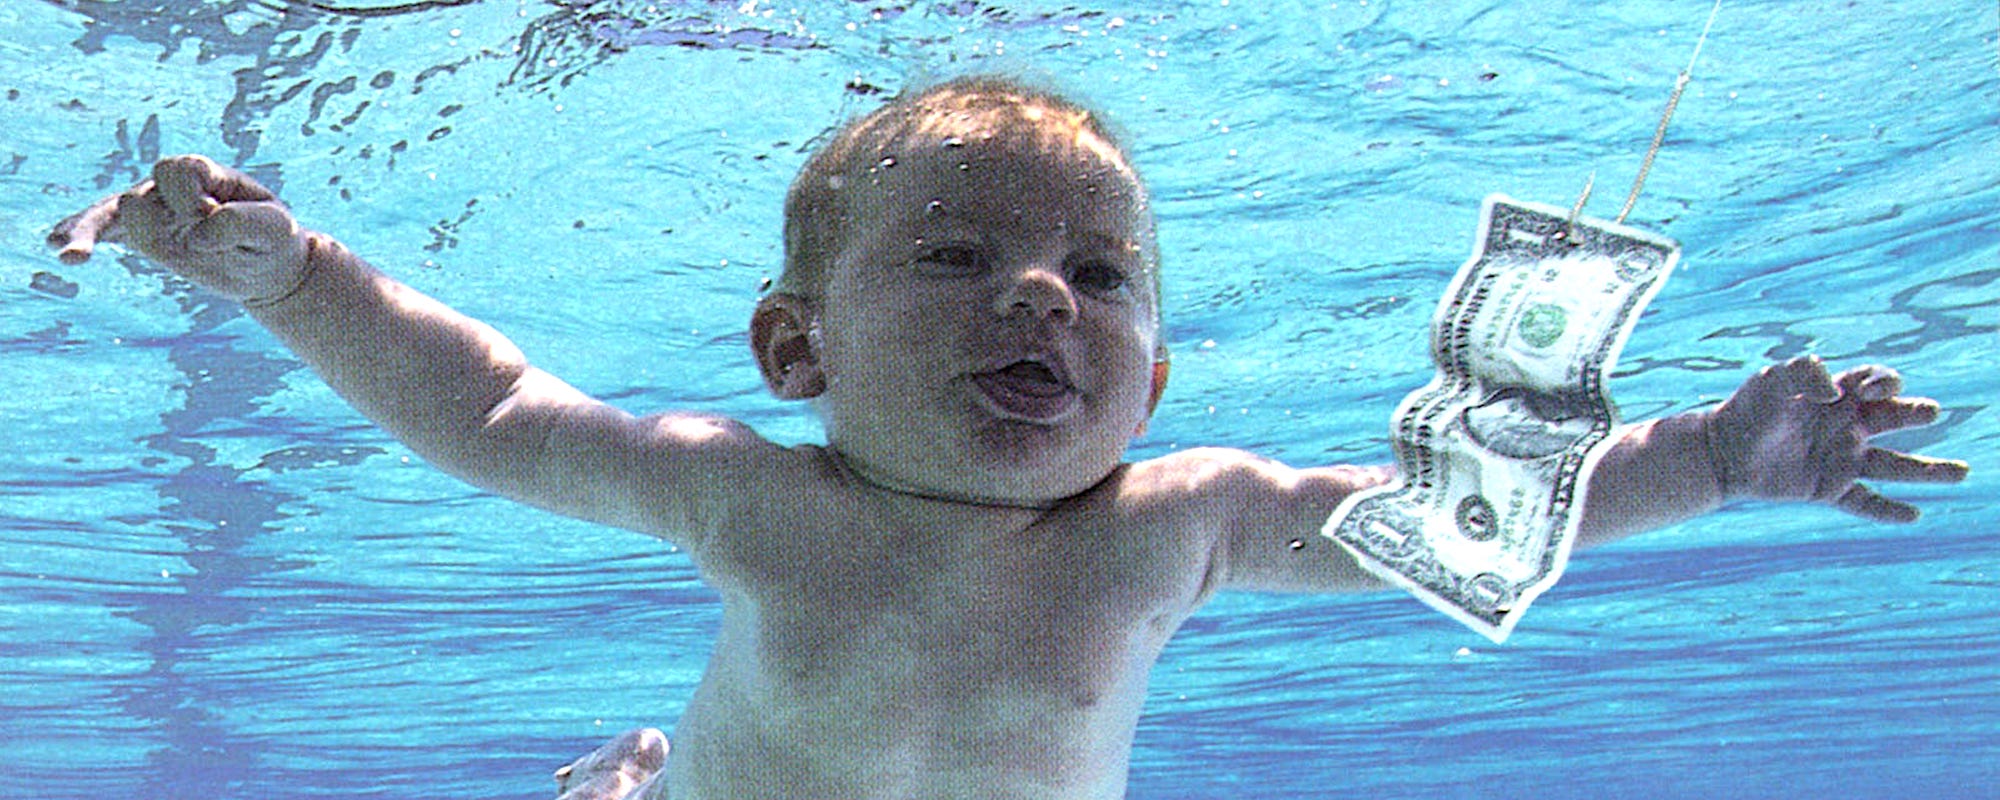 Nirvana ‘Nevermind’ Lawsuit Gets Refiled in Court